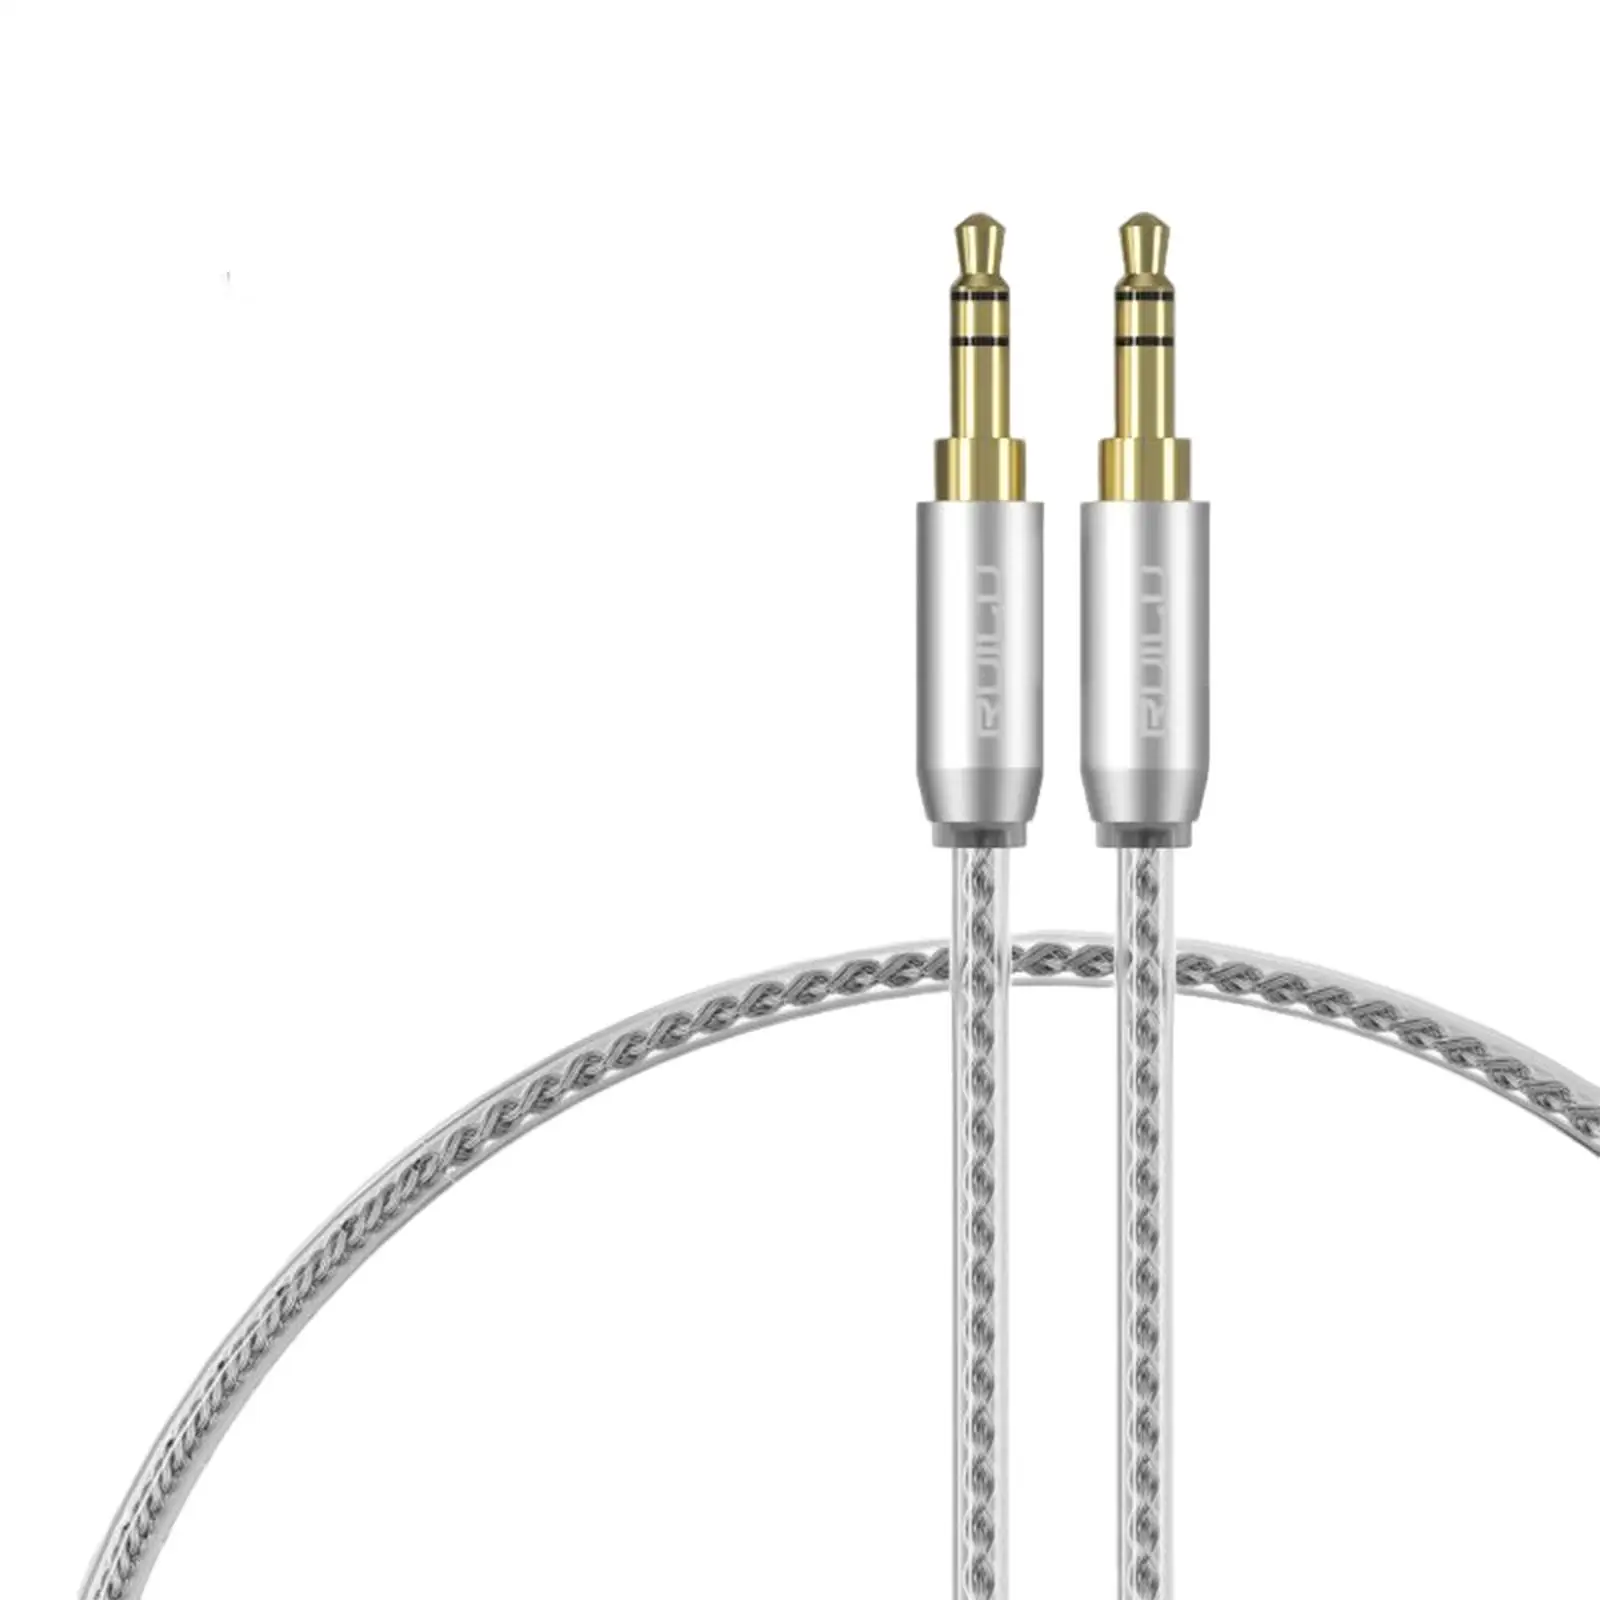 Audio Cable AUX Cable Plated Extension for Smartphone Speakers Headphones Car